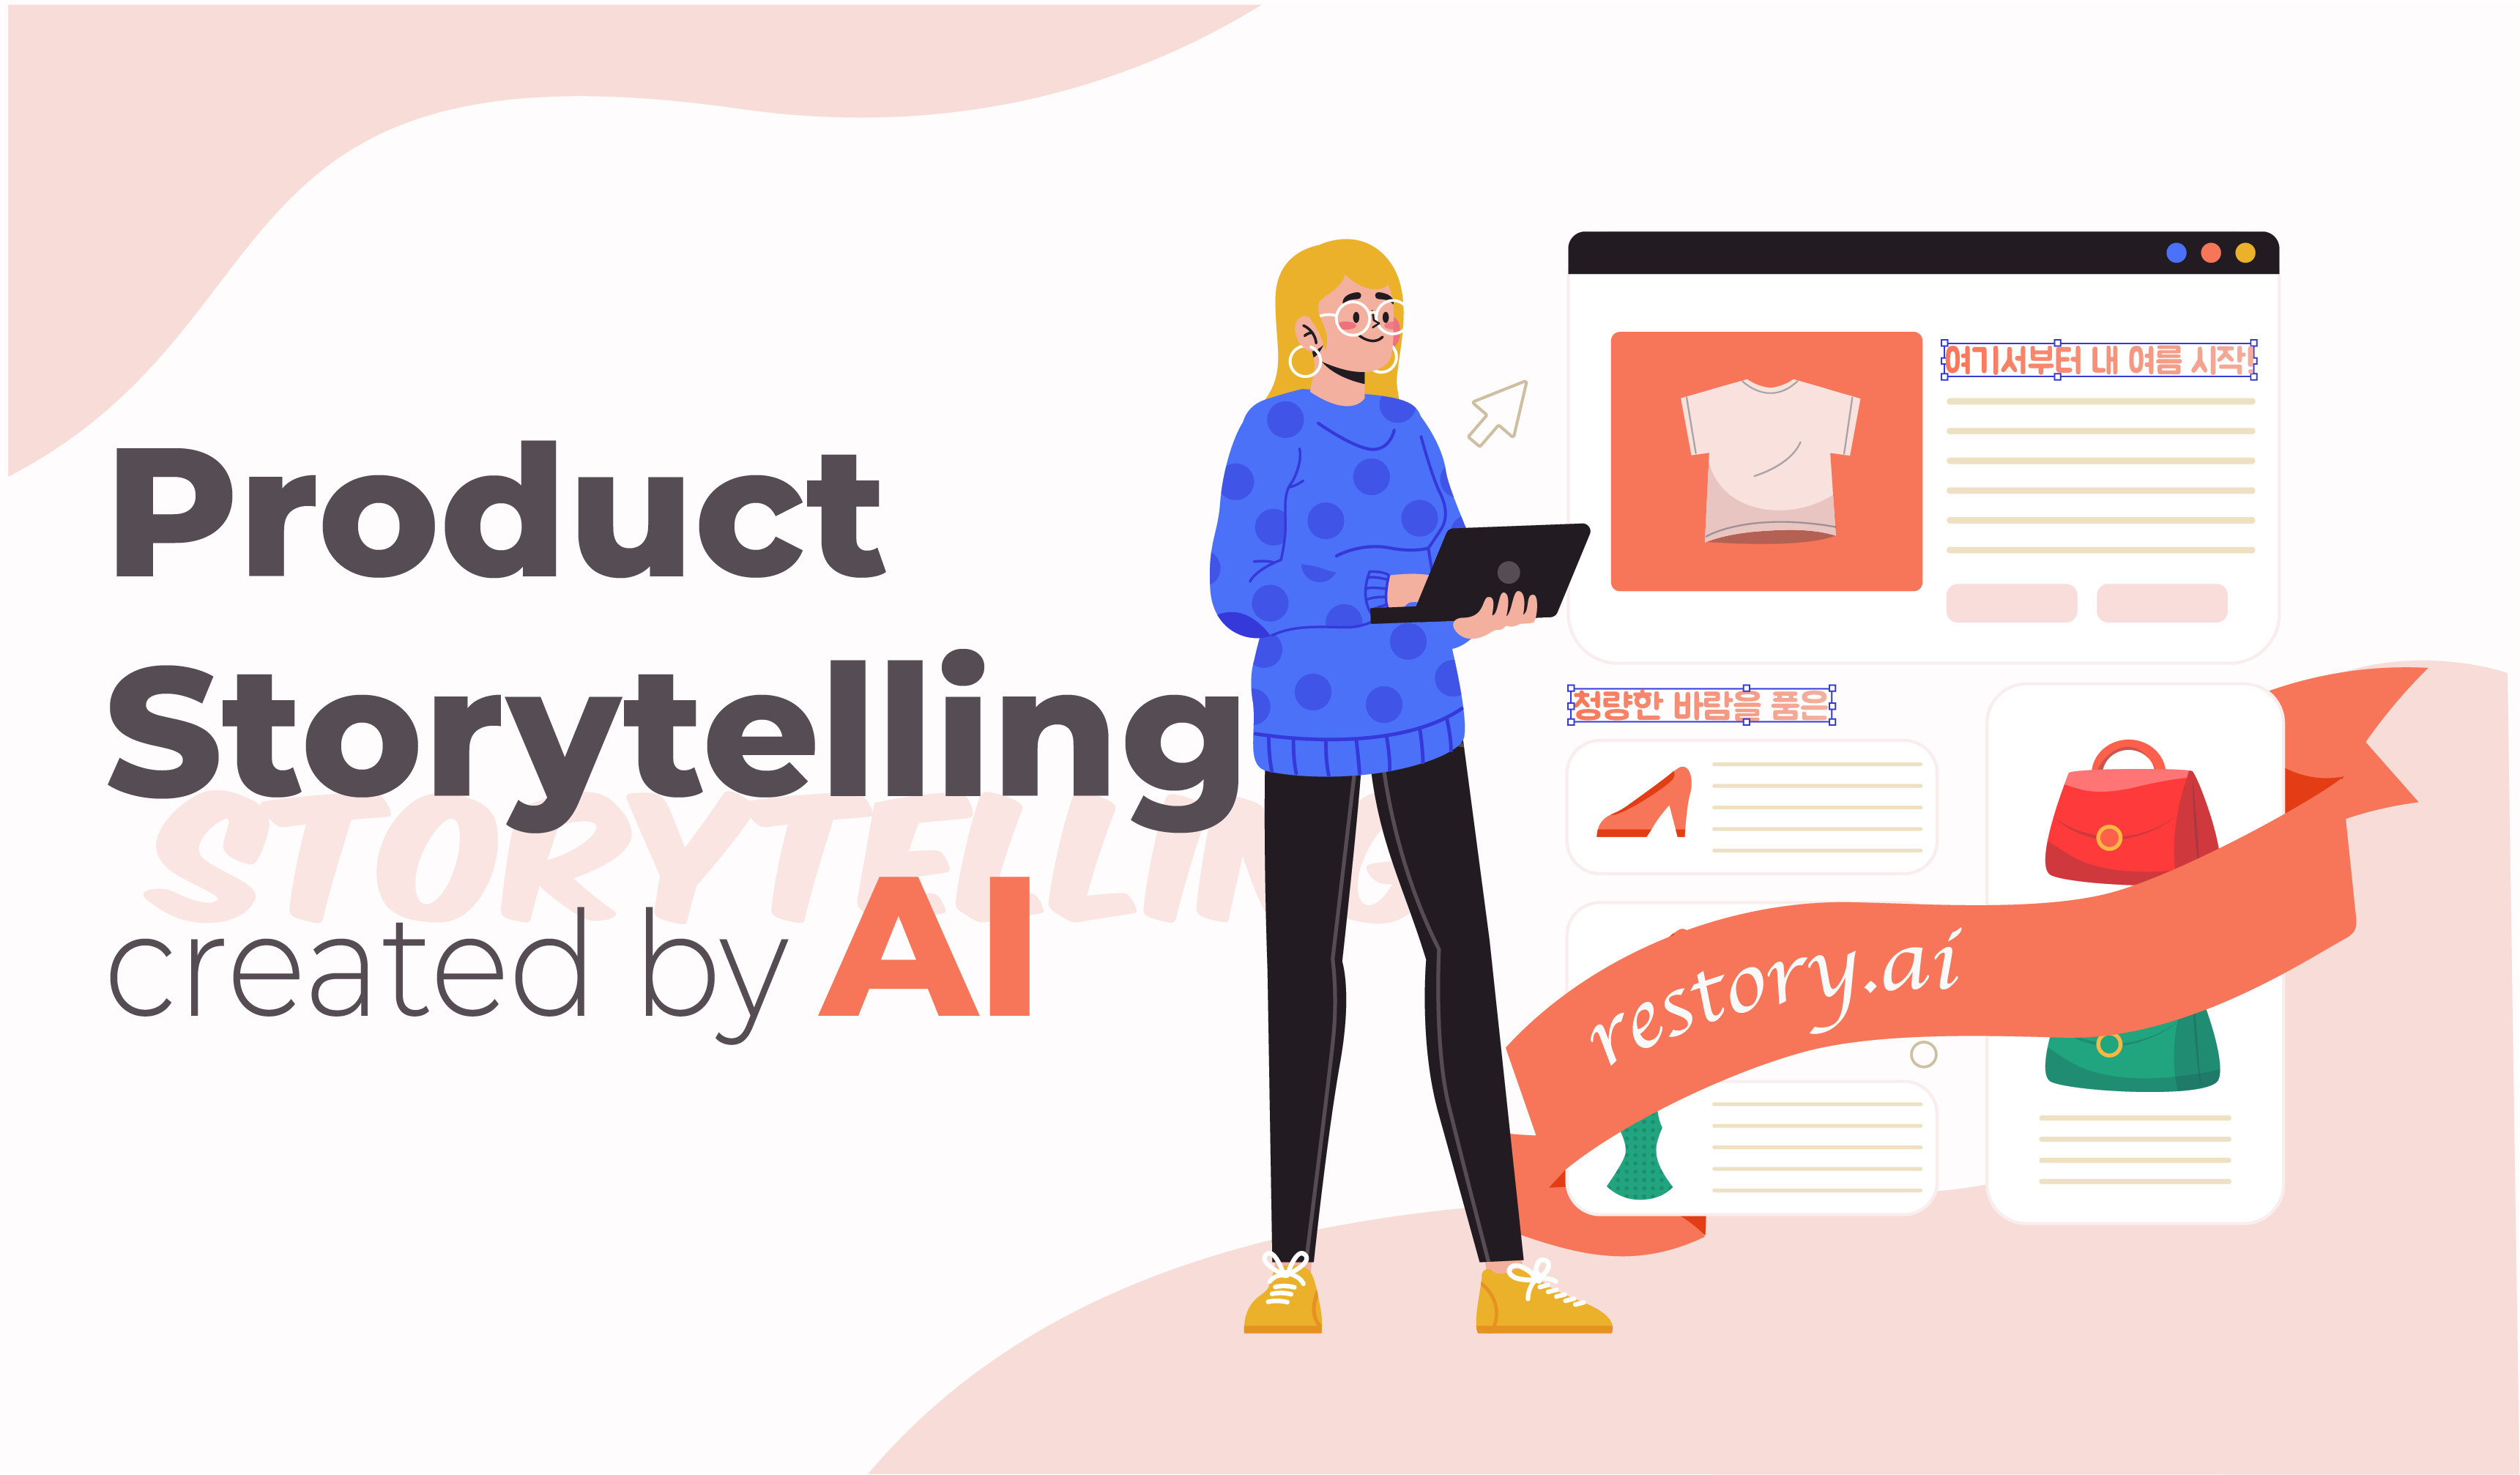 AI-Powered Storytelling Product Recommendations✨ - restory.ai